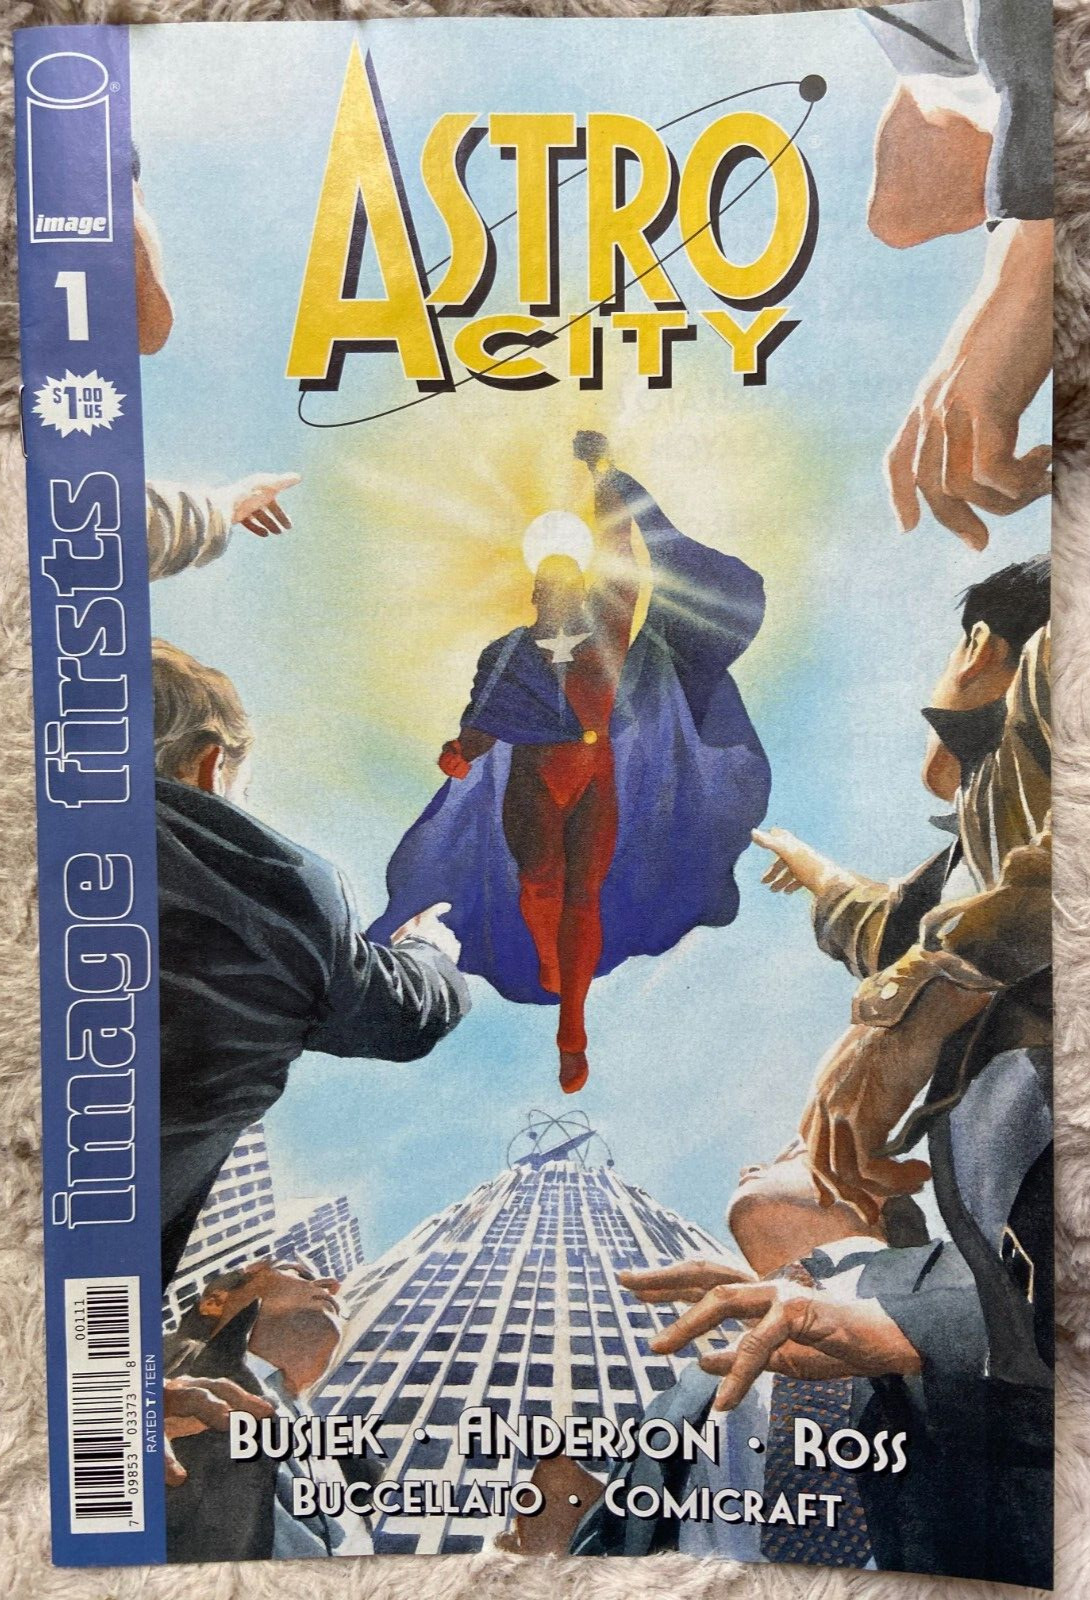 2022 Image Comics Image Firsts Astro City 1 Alex Ross Cover Variant Reprint F/S